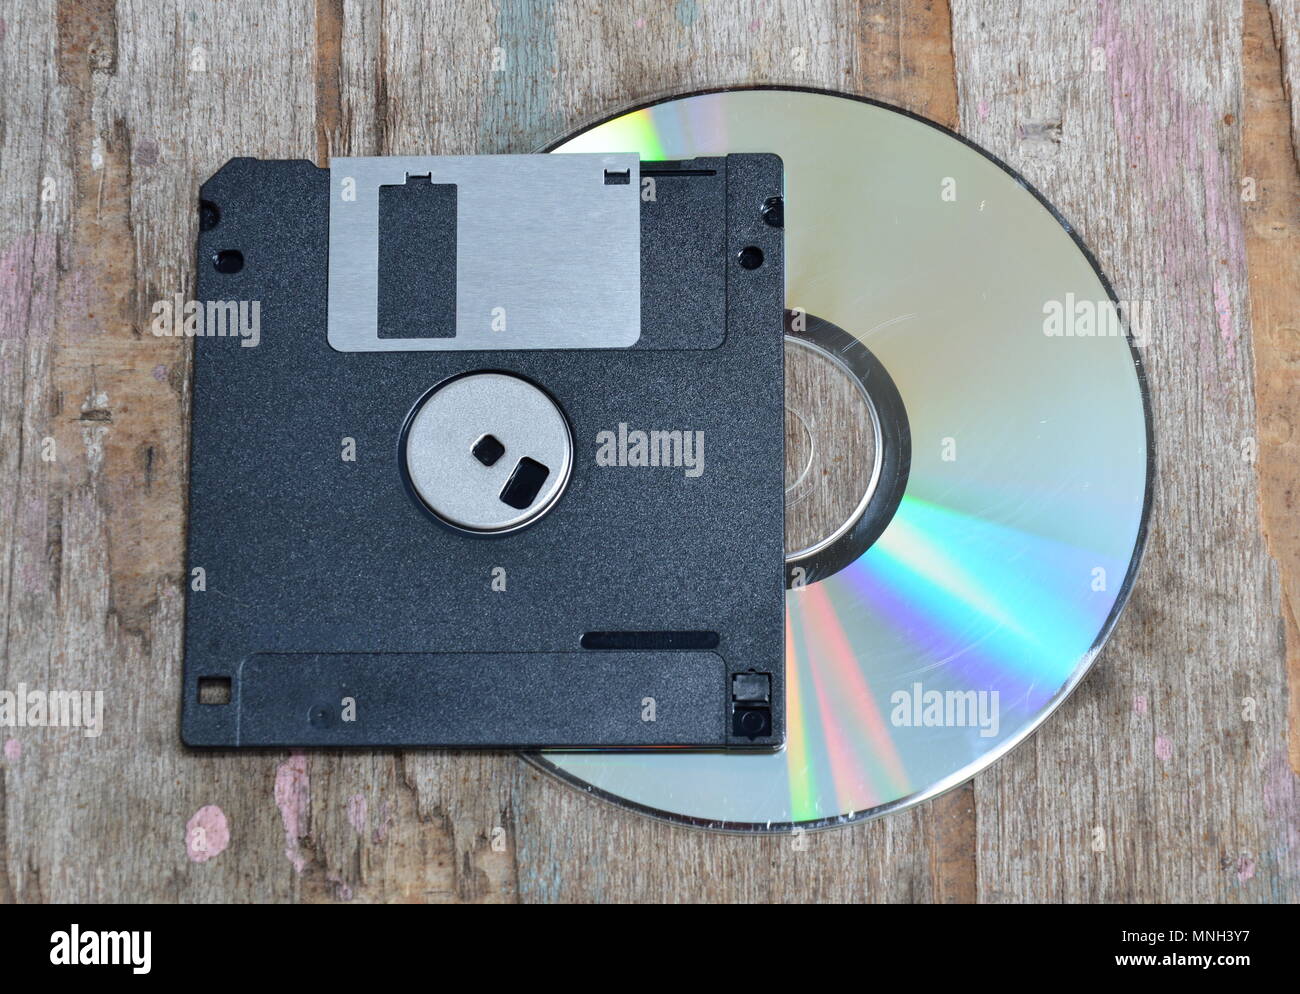 floppy disk and compact disc on wood board Stock Photo